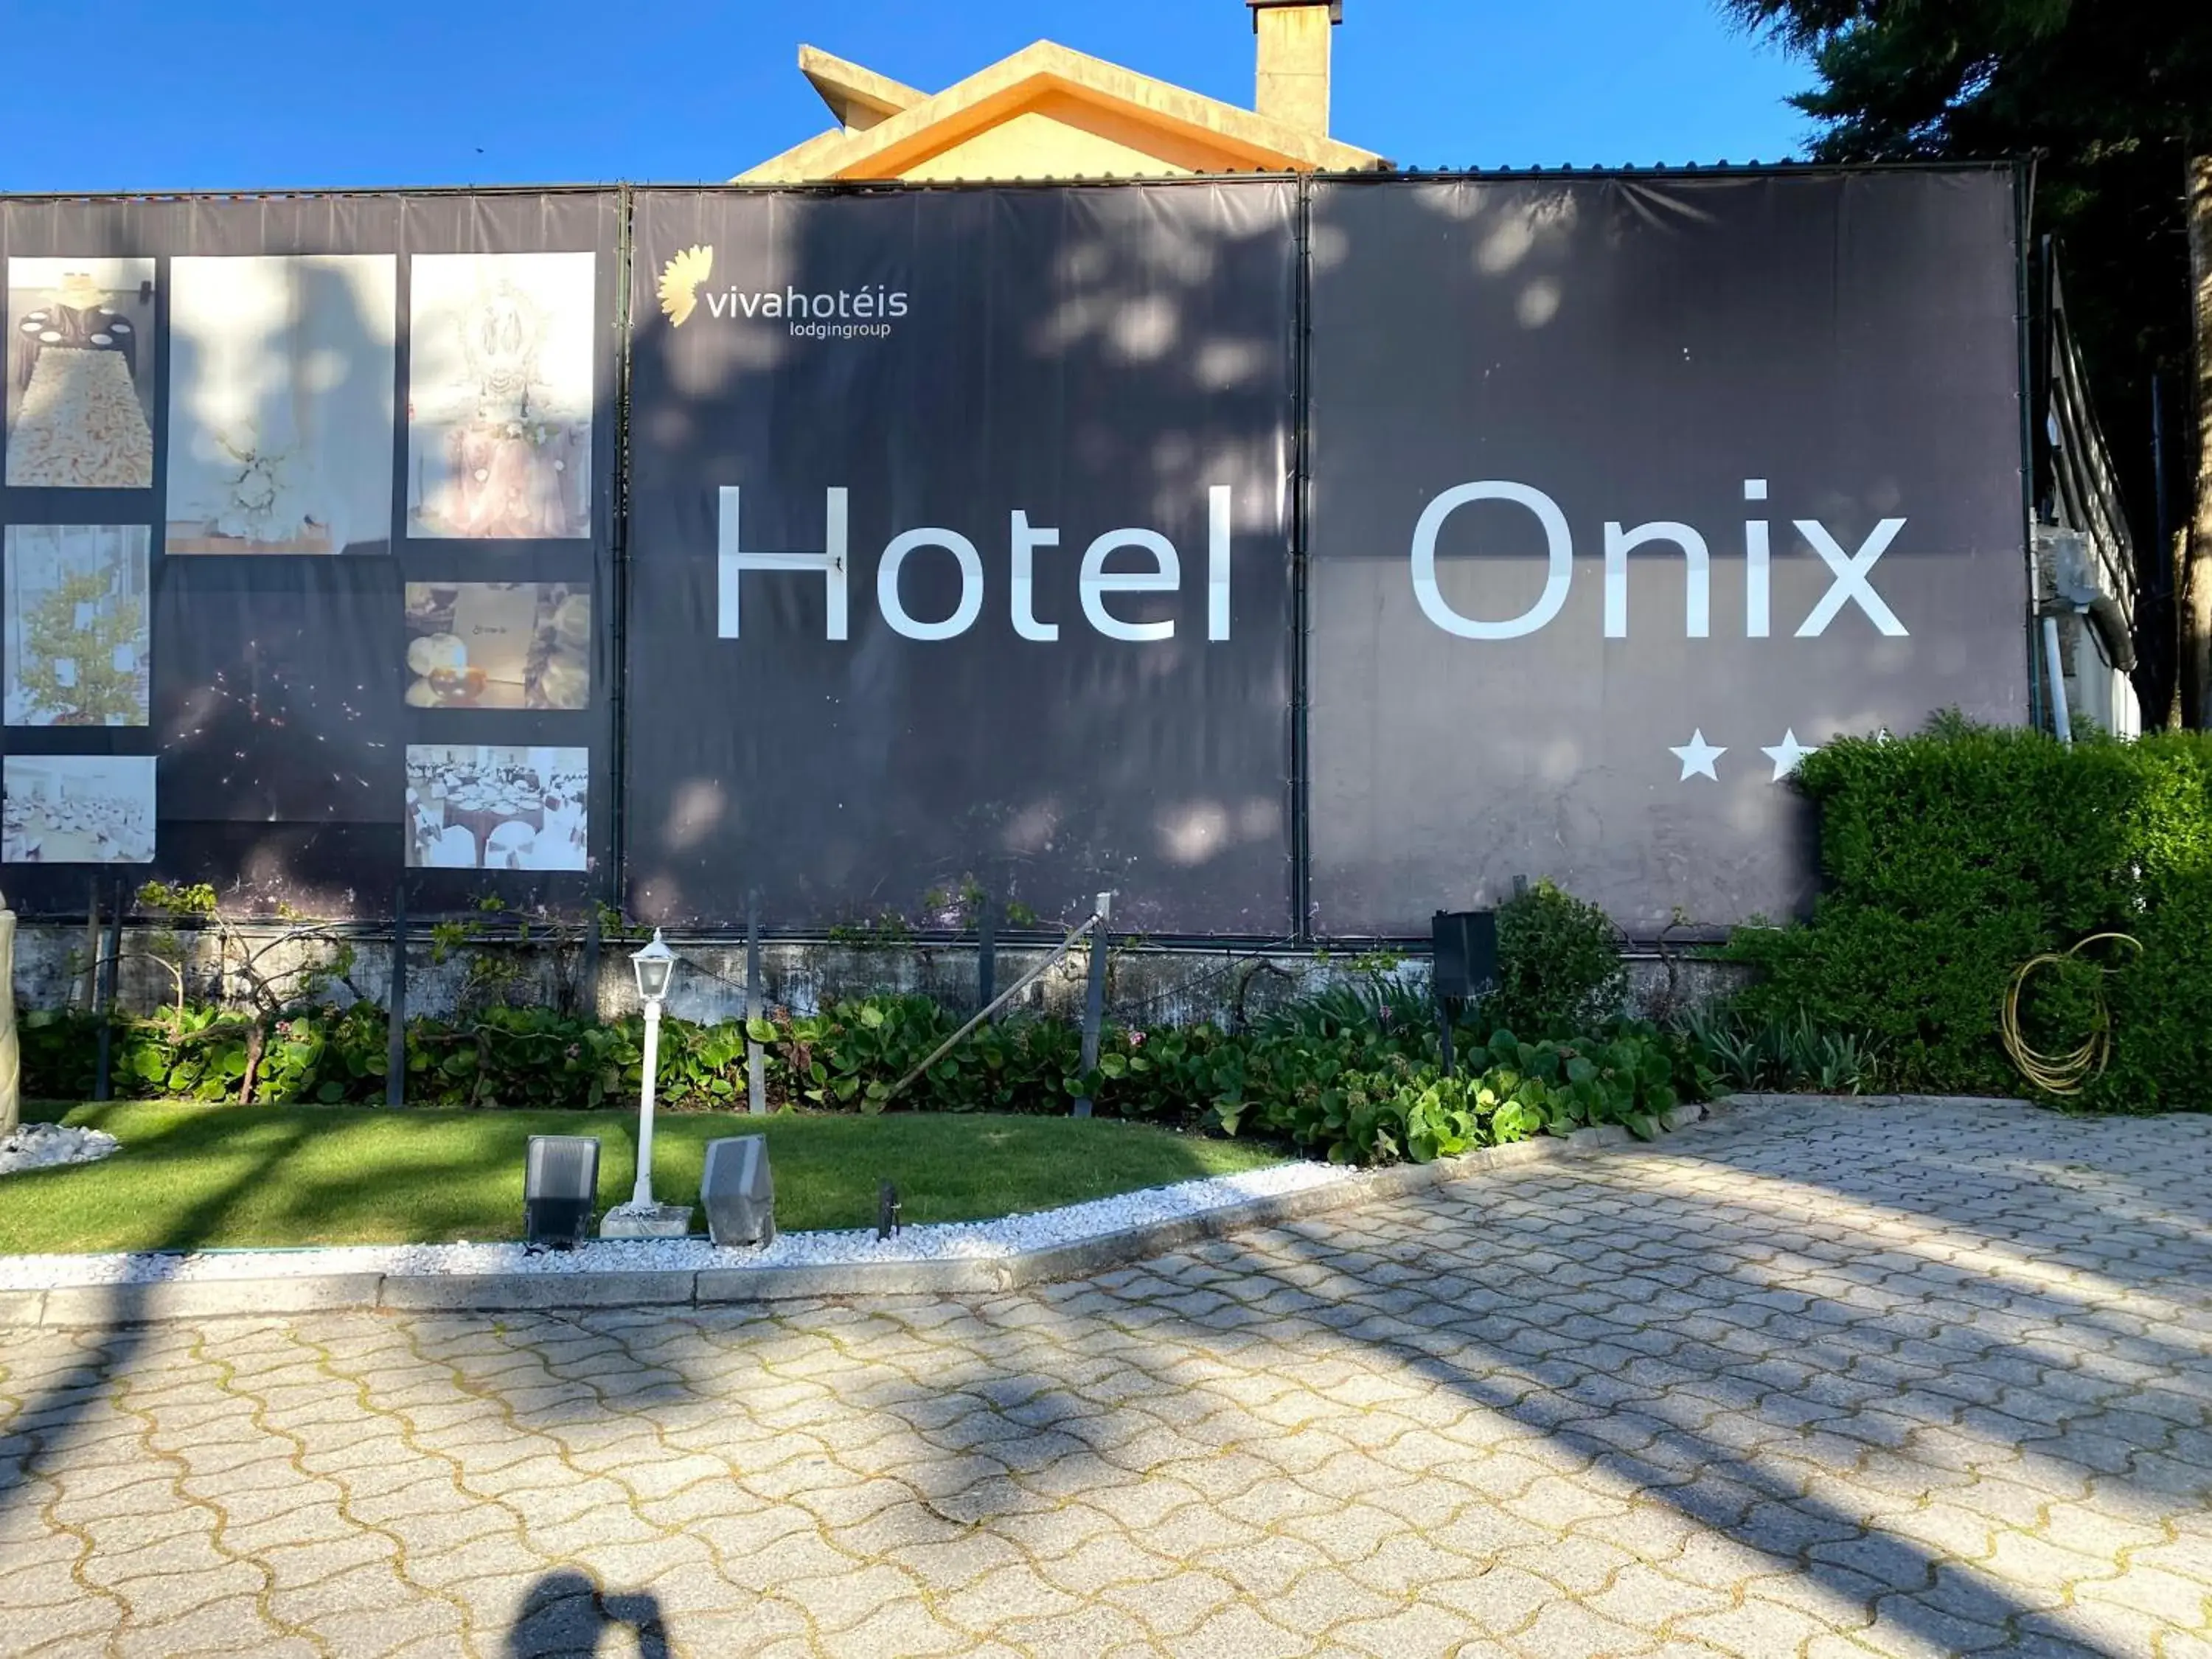 Property building in Hotel Onix